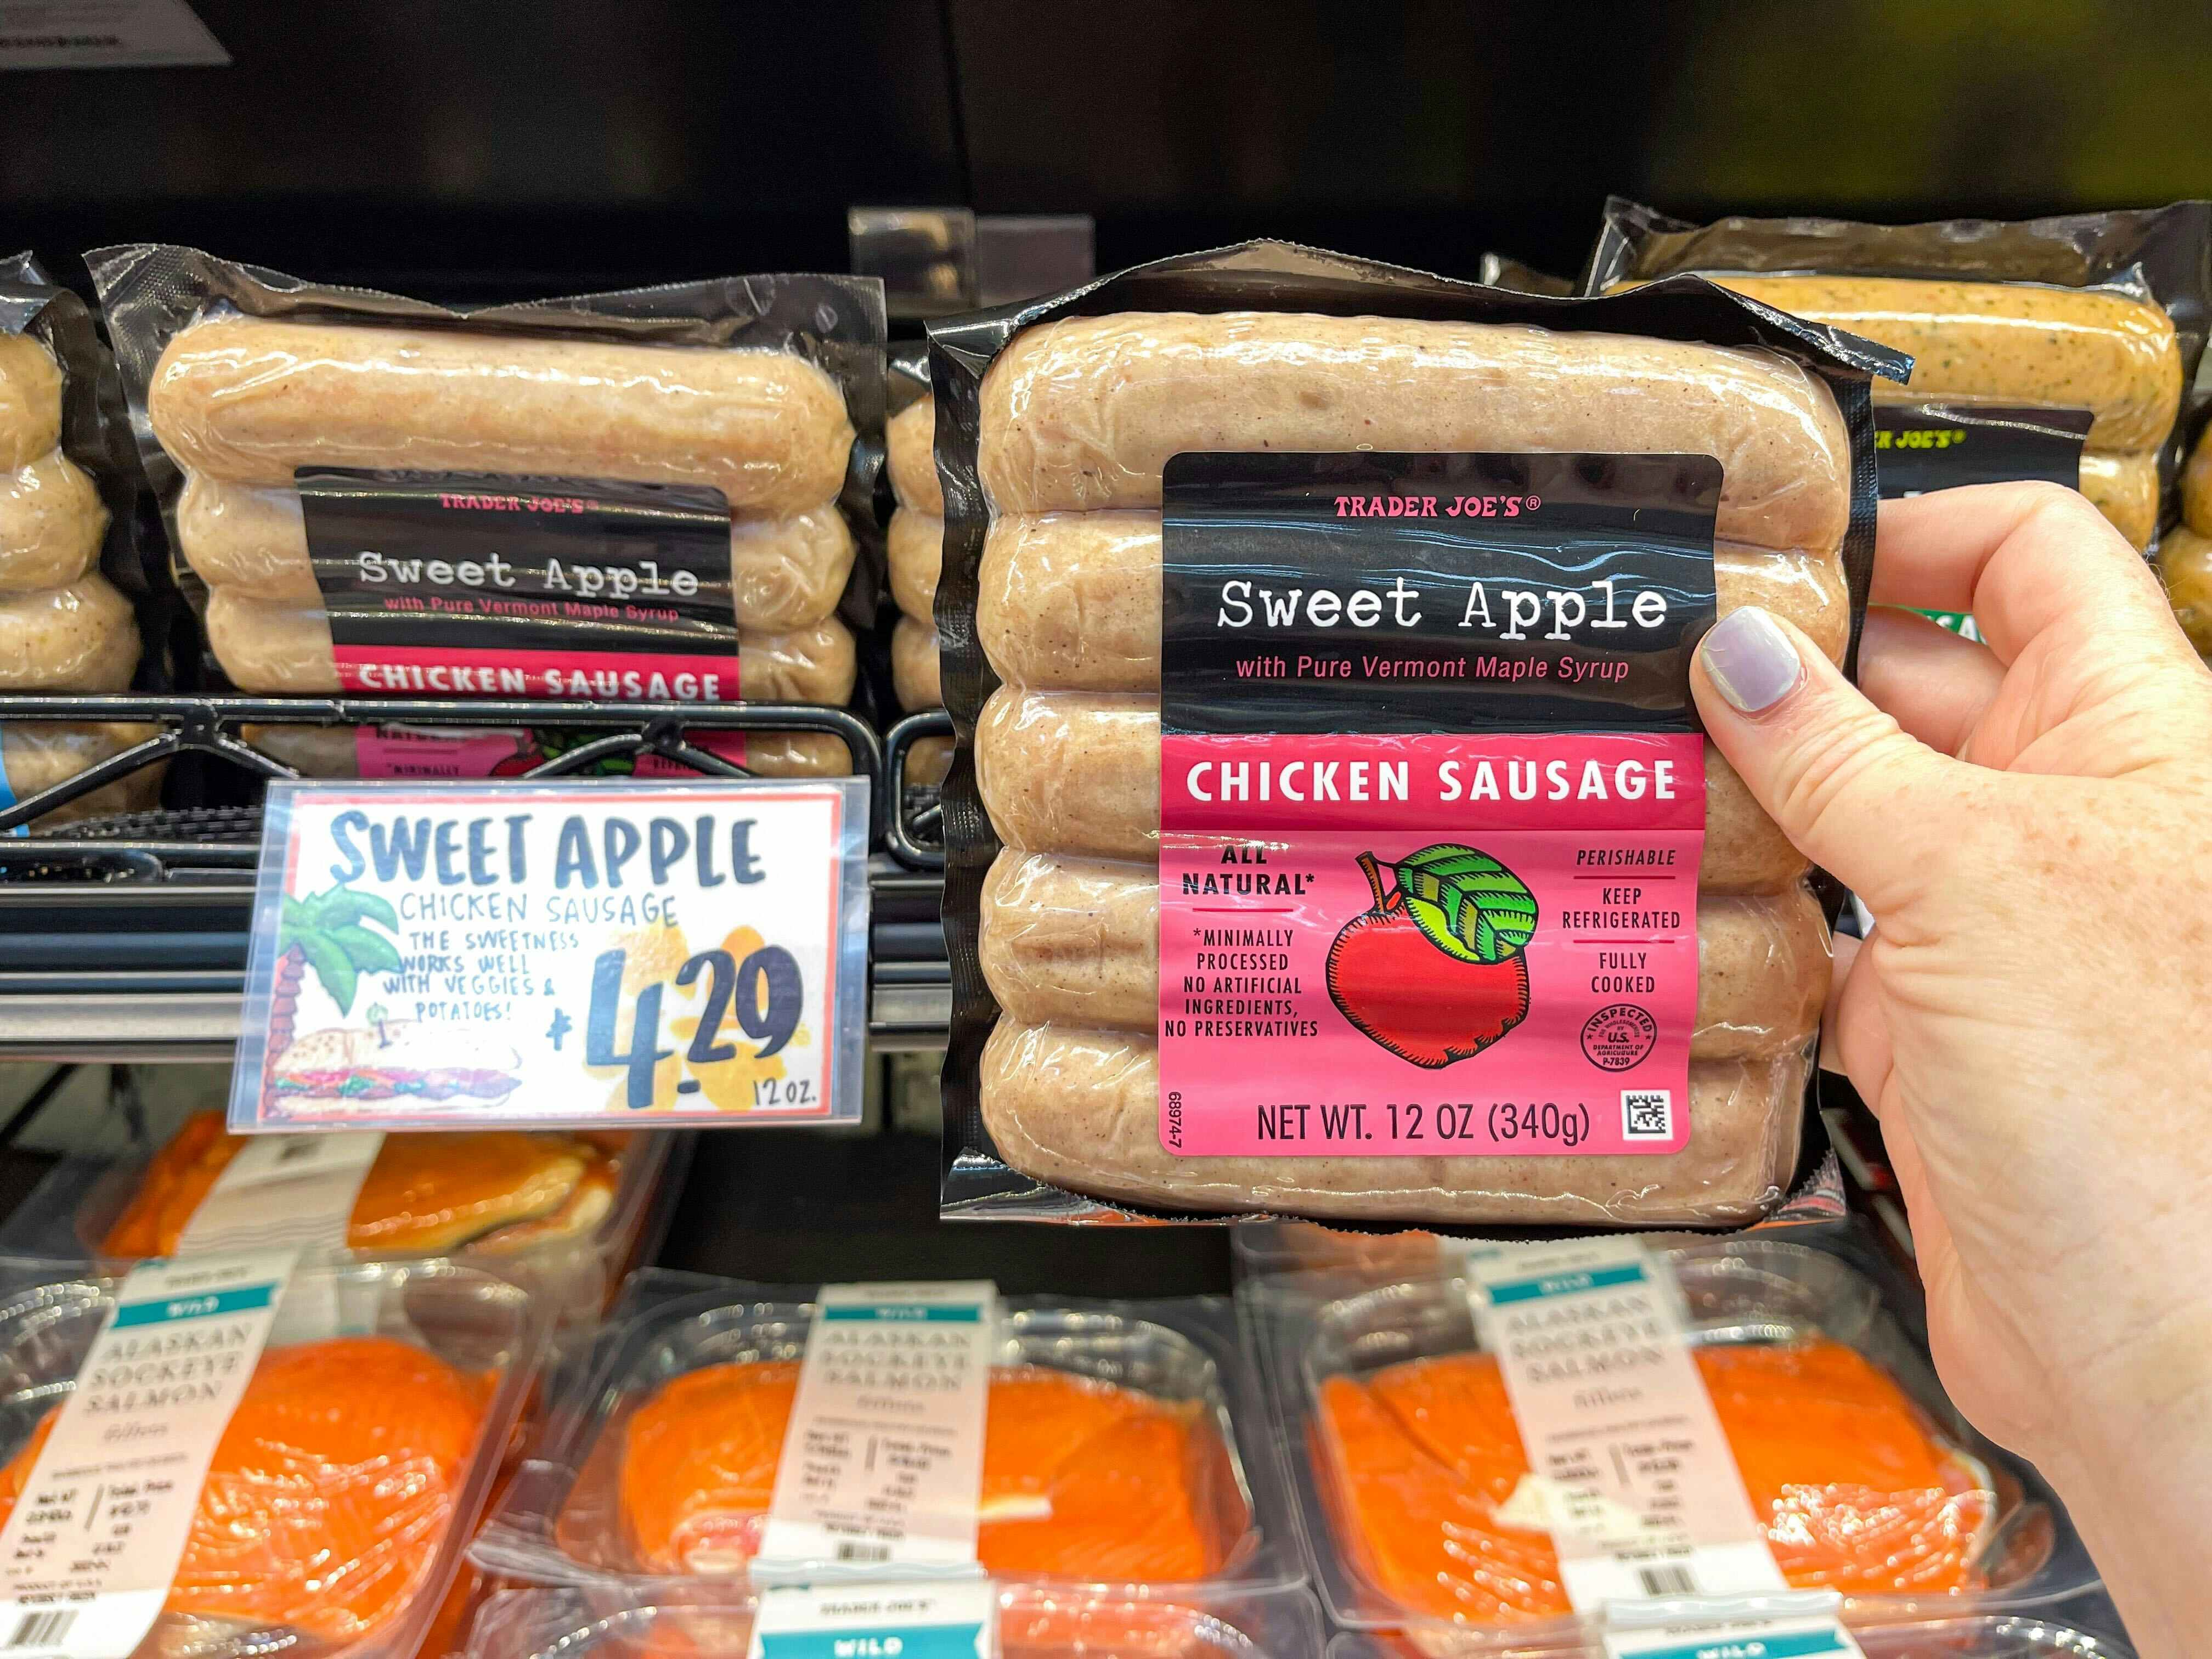 A person's hand holding a package of Trader Joe's Sweet Apple Chicken Sausage near a price sign on a refrigerated shelf at Trader Joe's.